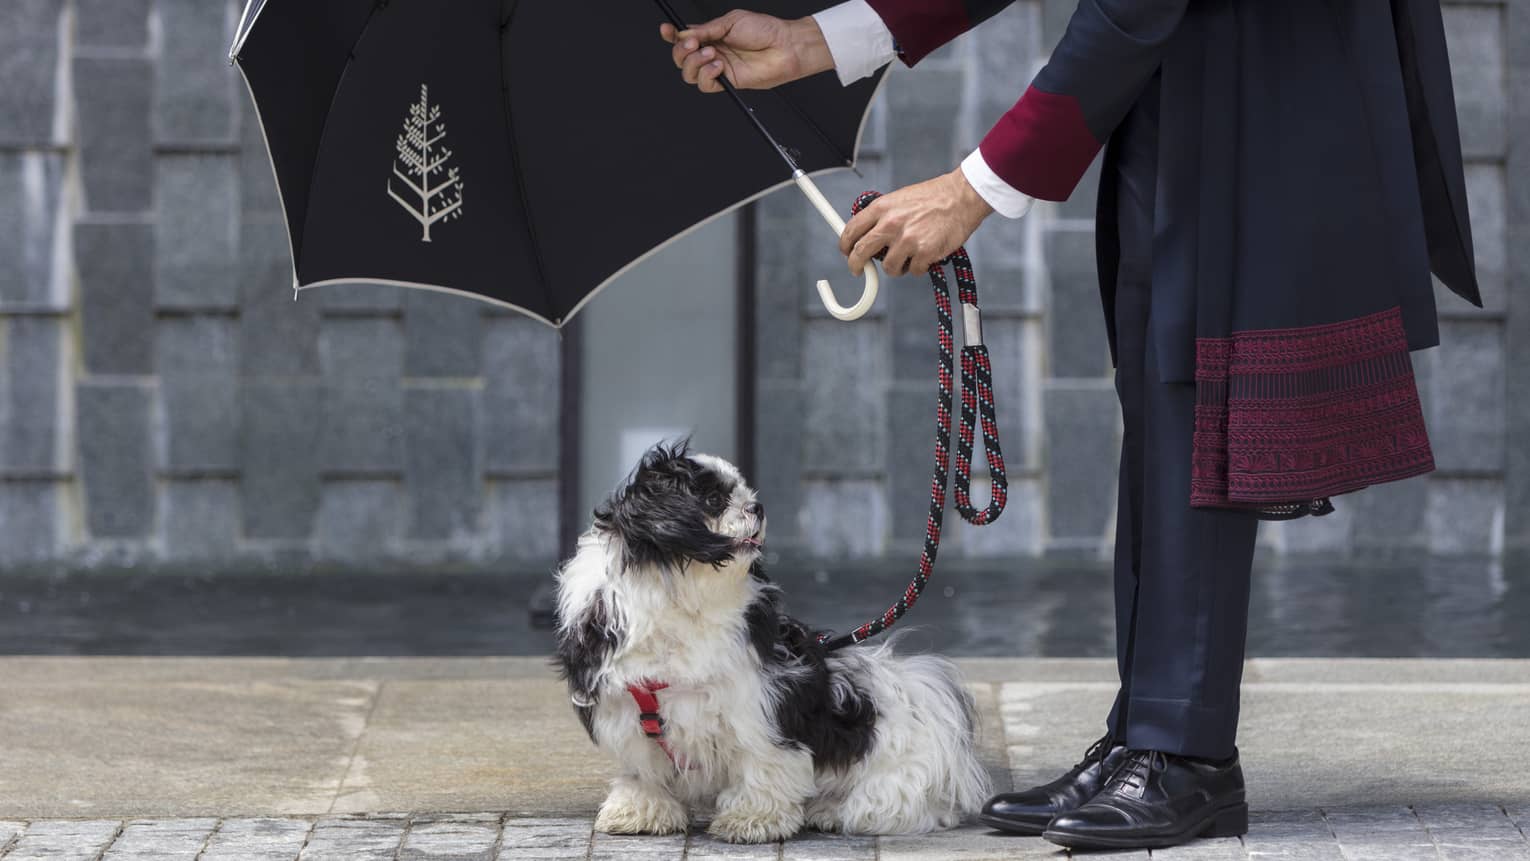 Doorman at Four Seasons Hotel Bengaluru holds a black Four Seasons umbrella over a small black and white dog